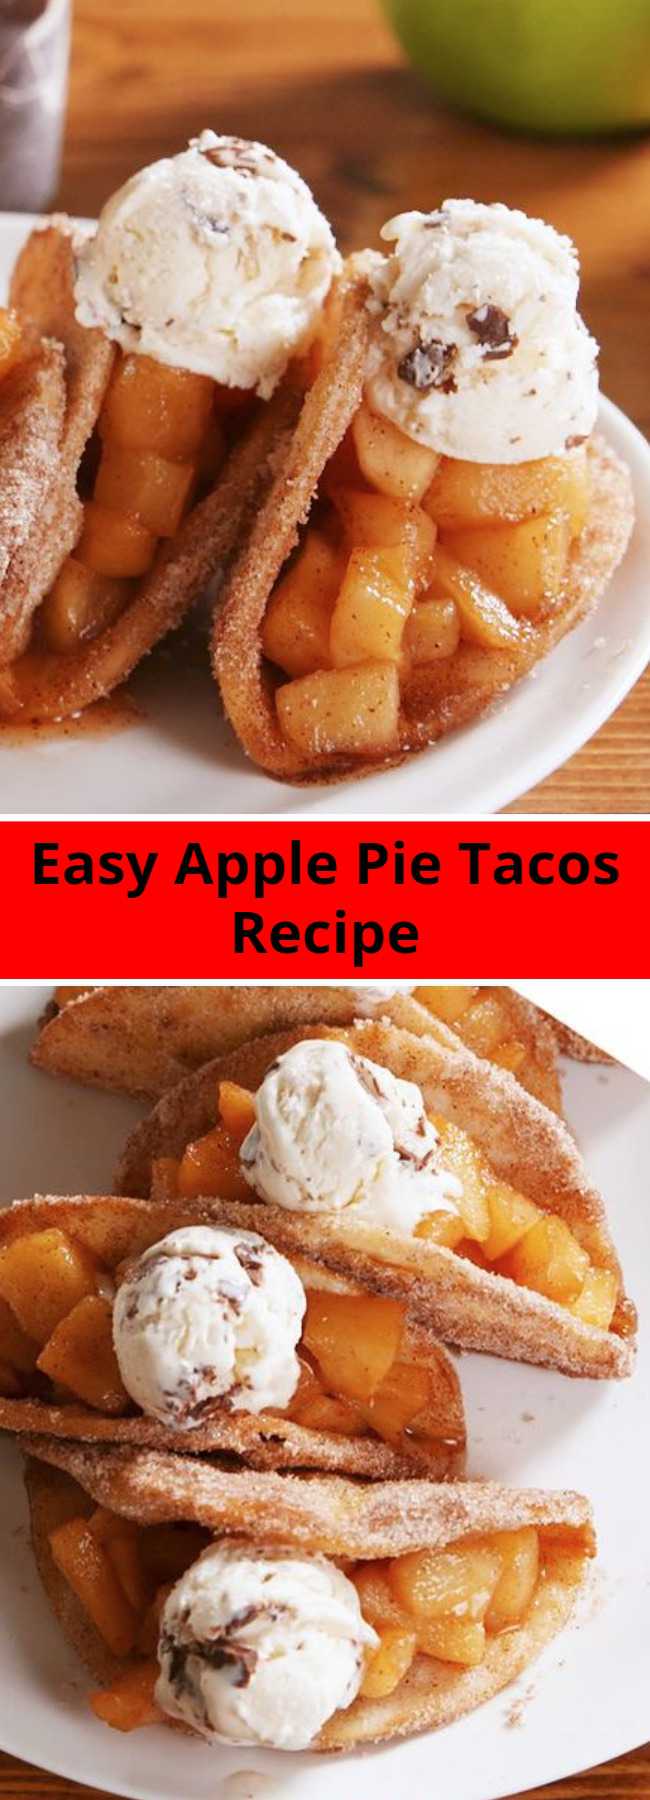 Easy Apple Pie Tacos Recipe - Don't be intimidated by the frying! It's actually easy. Once the tortilla hits the hot oil, it crisps up and keeps it shape quickly. Just know you'll need to use your tongs pretty much the whole time. #applepie #desserttacos #applepierecipes #apple #cinnamon #fruitdesserts #vanillaicecream